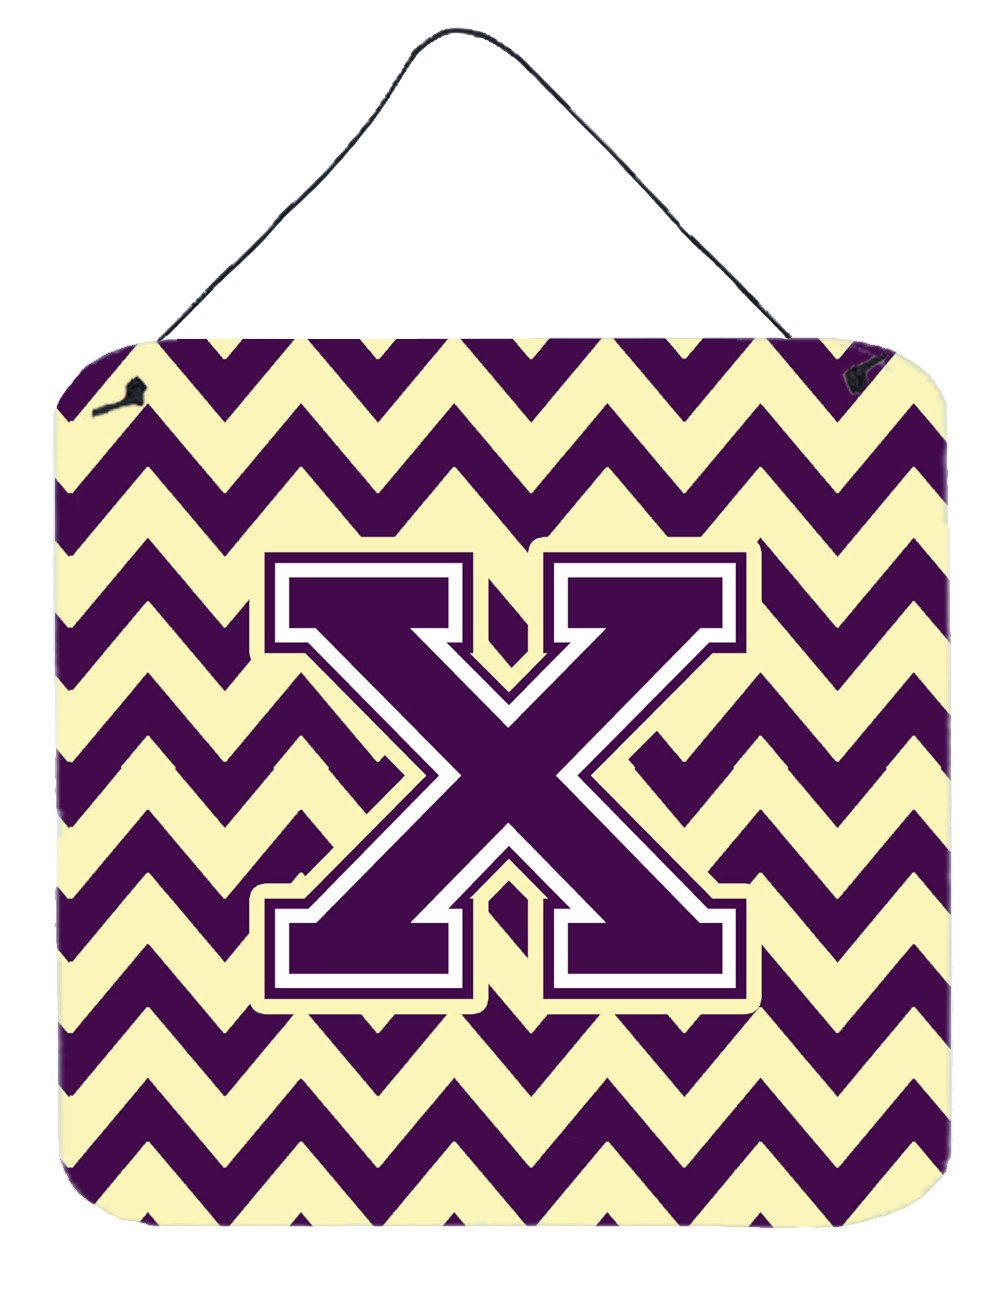 Letter X Chevron Purple and Gold Wall or Door Hanging Prints CJ1058-XDS66 by Caroline's Treasures